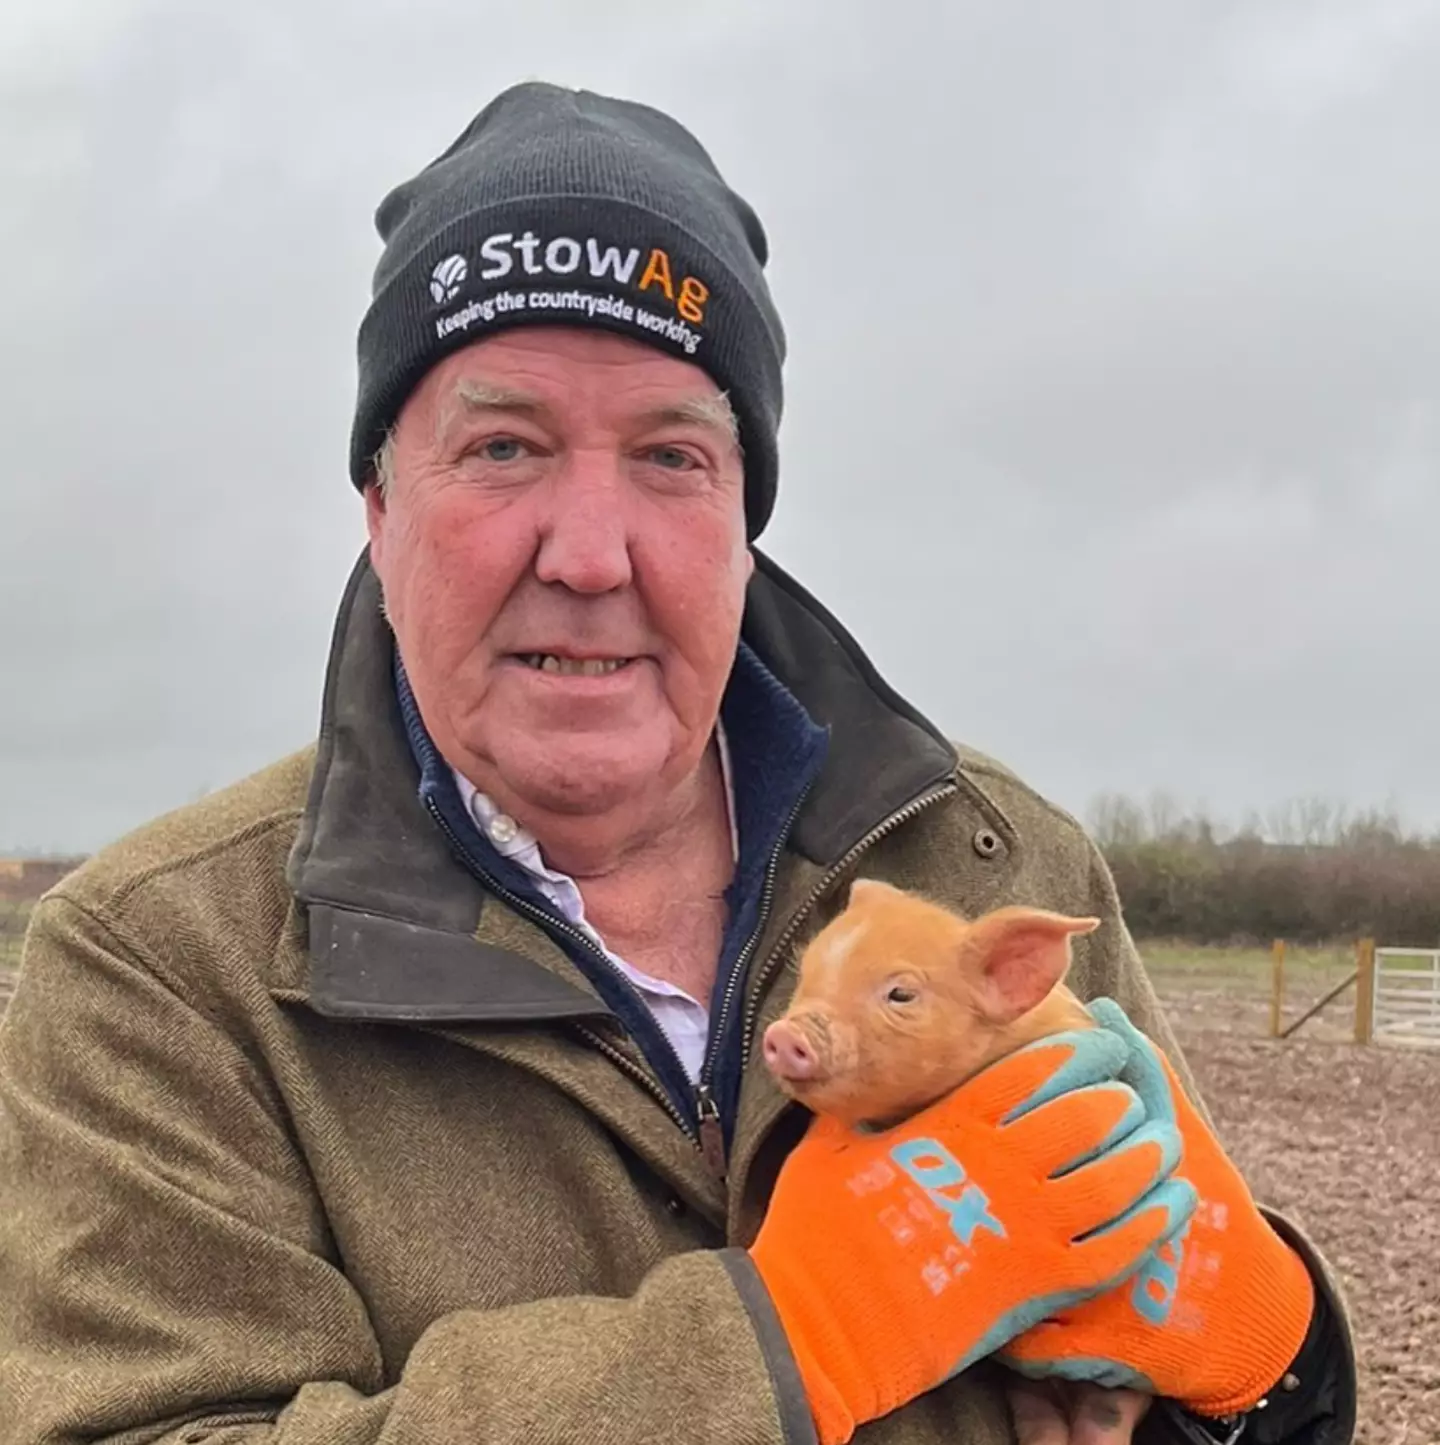 Jeremy Clarkson with a ginger piglet on his farm.